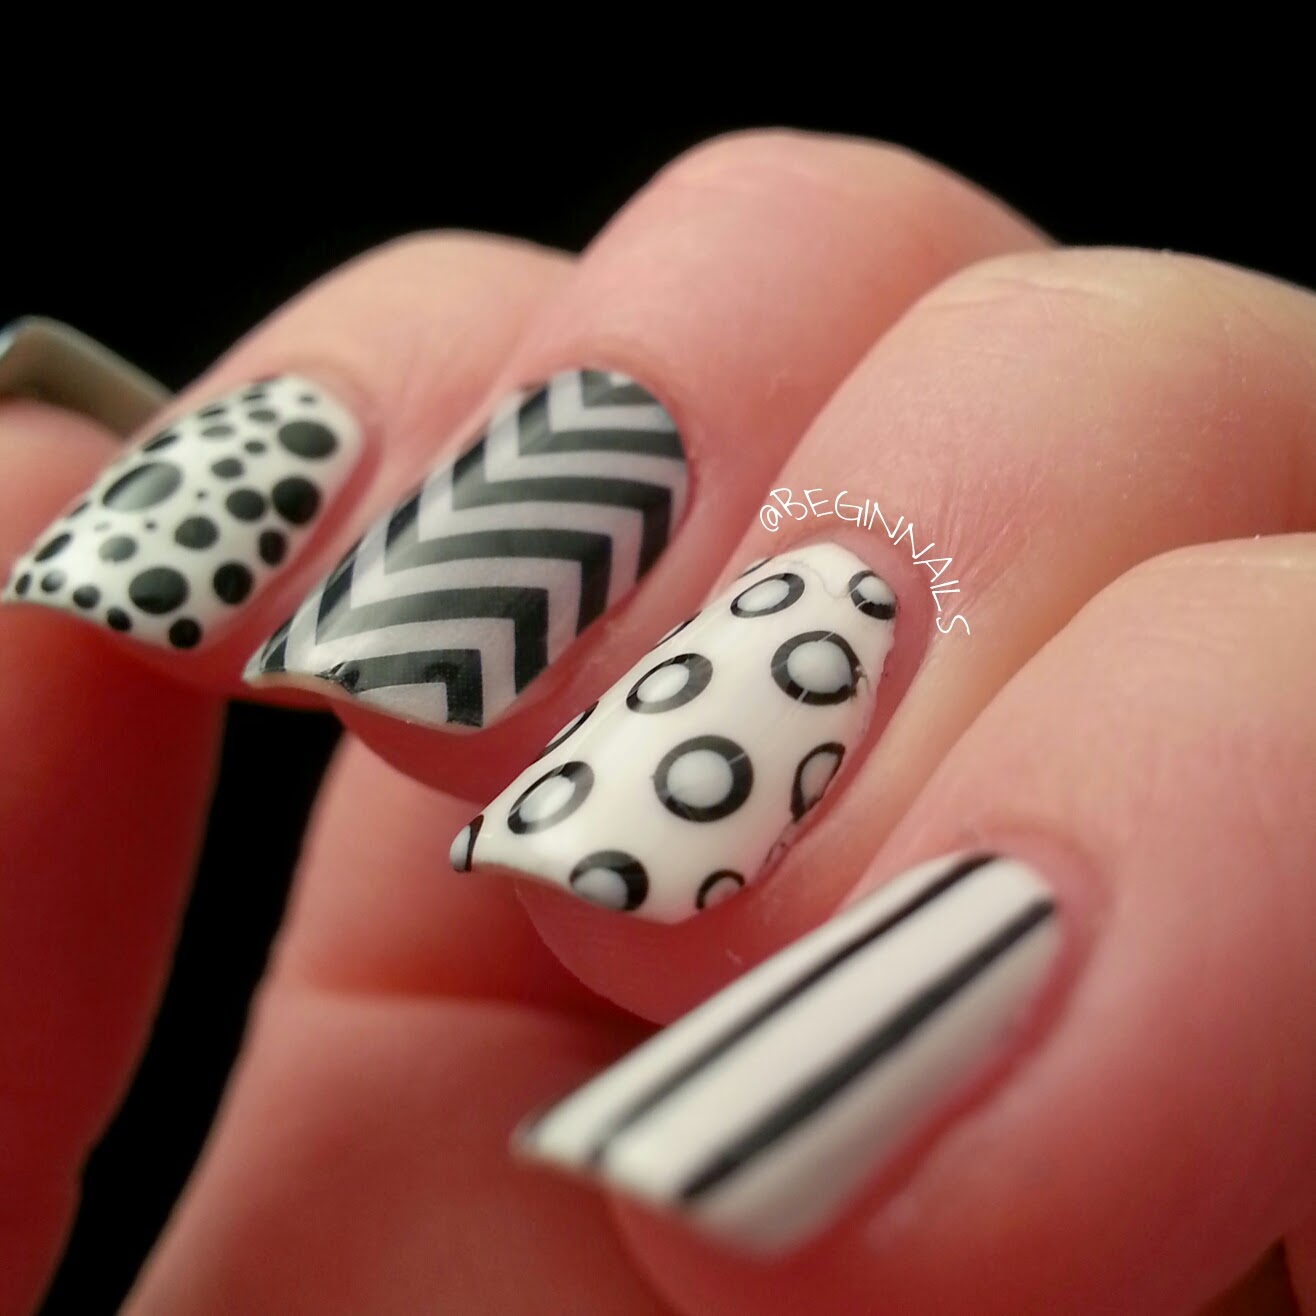 Let's Begin Nails: Jamberry Review and Sample Sheet Giveaway